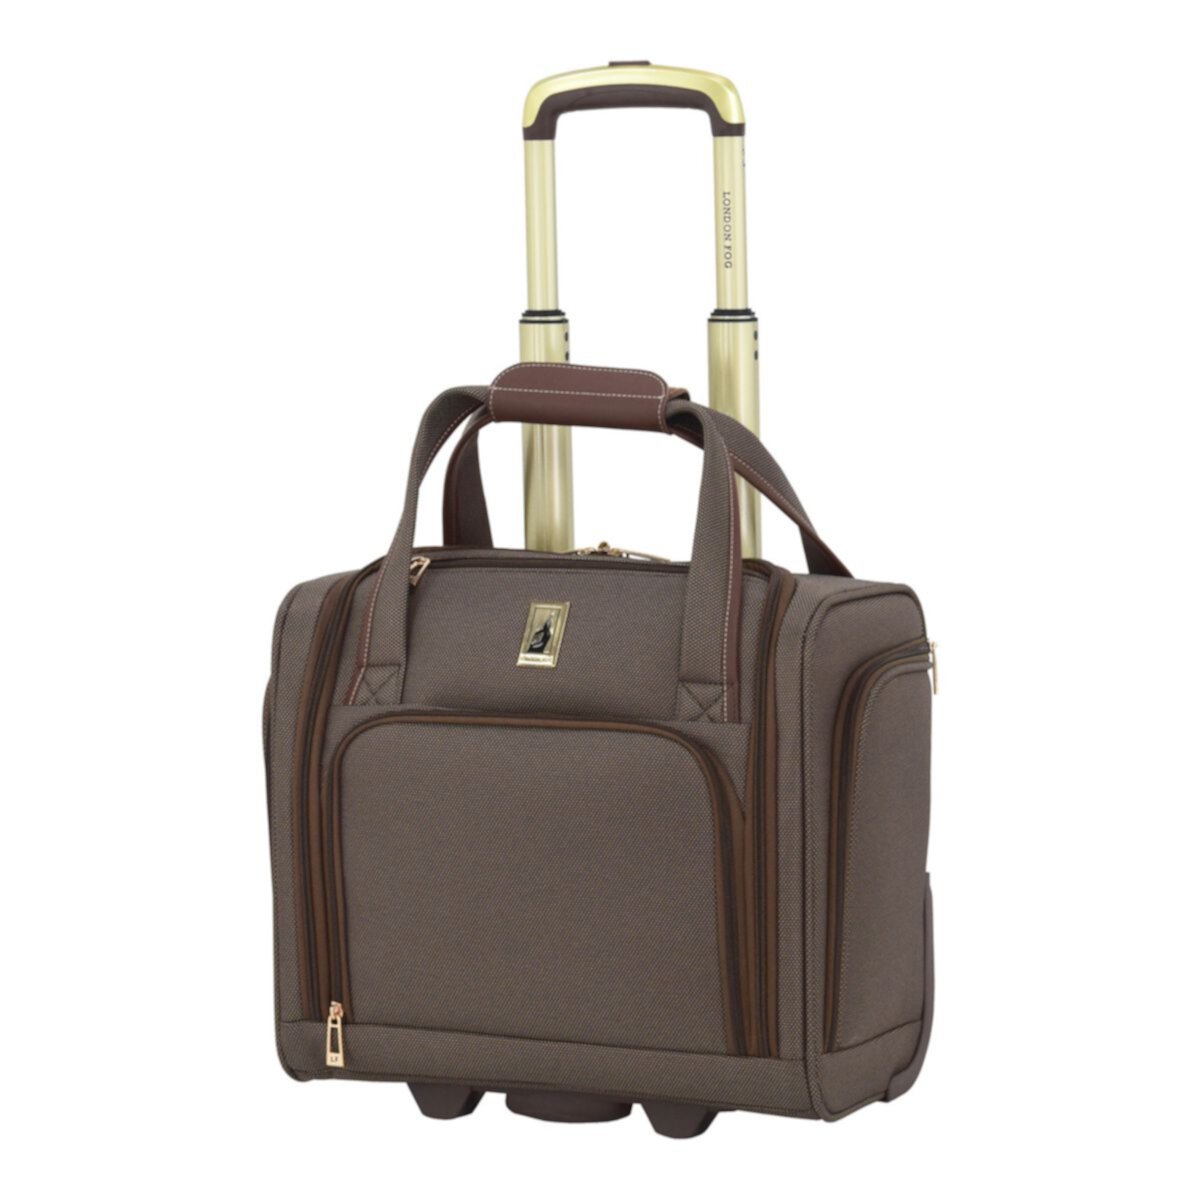 London Fog Liverpool 15-in. Underseater Wheeled Carry-On Luggage with USB London Fog